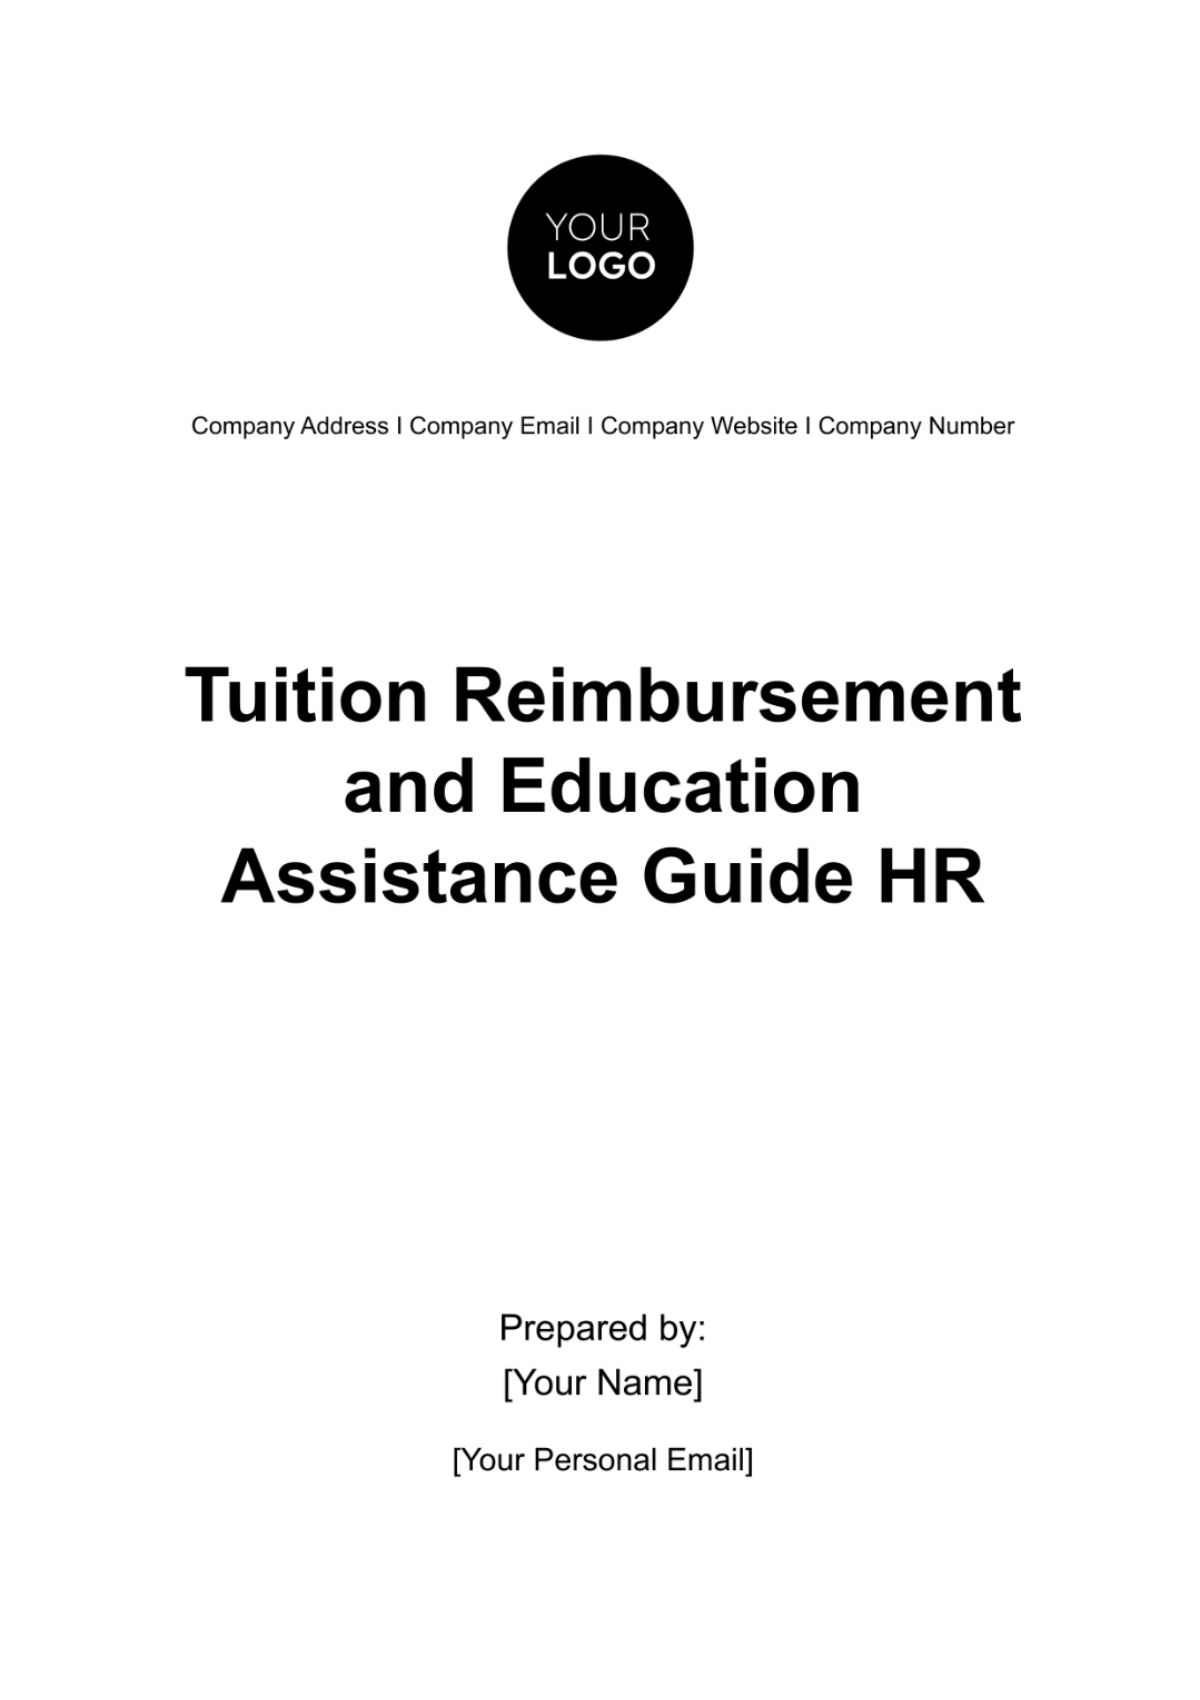 Free Tuition Reimbursement and Education Assistance Guide HR Template